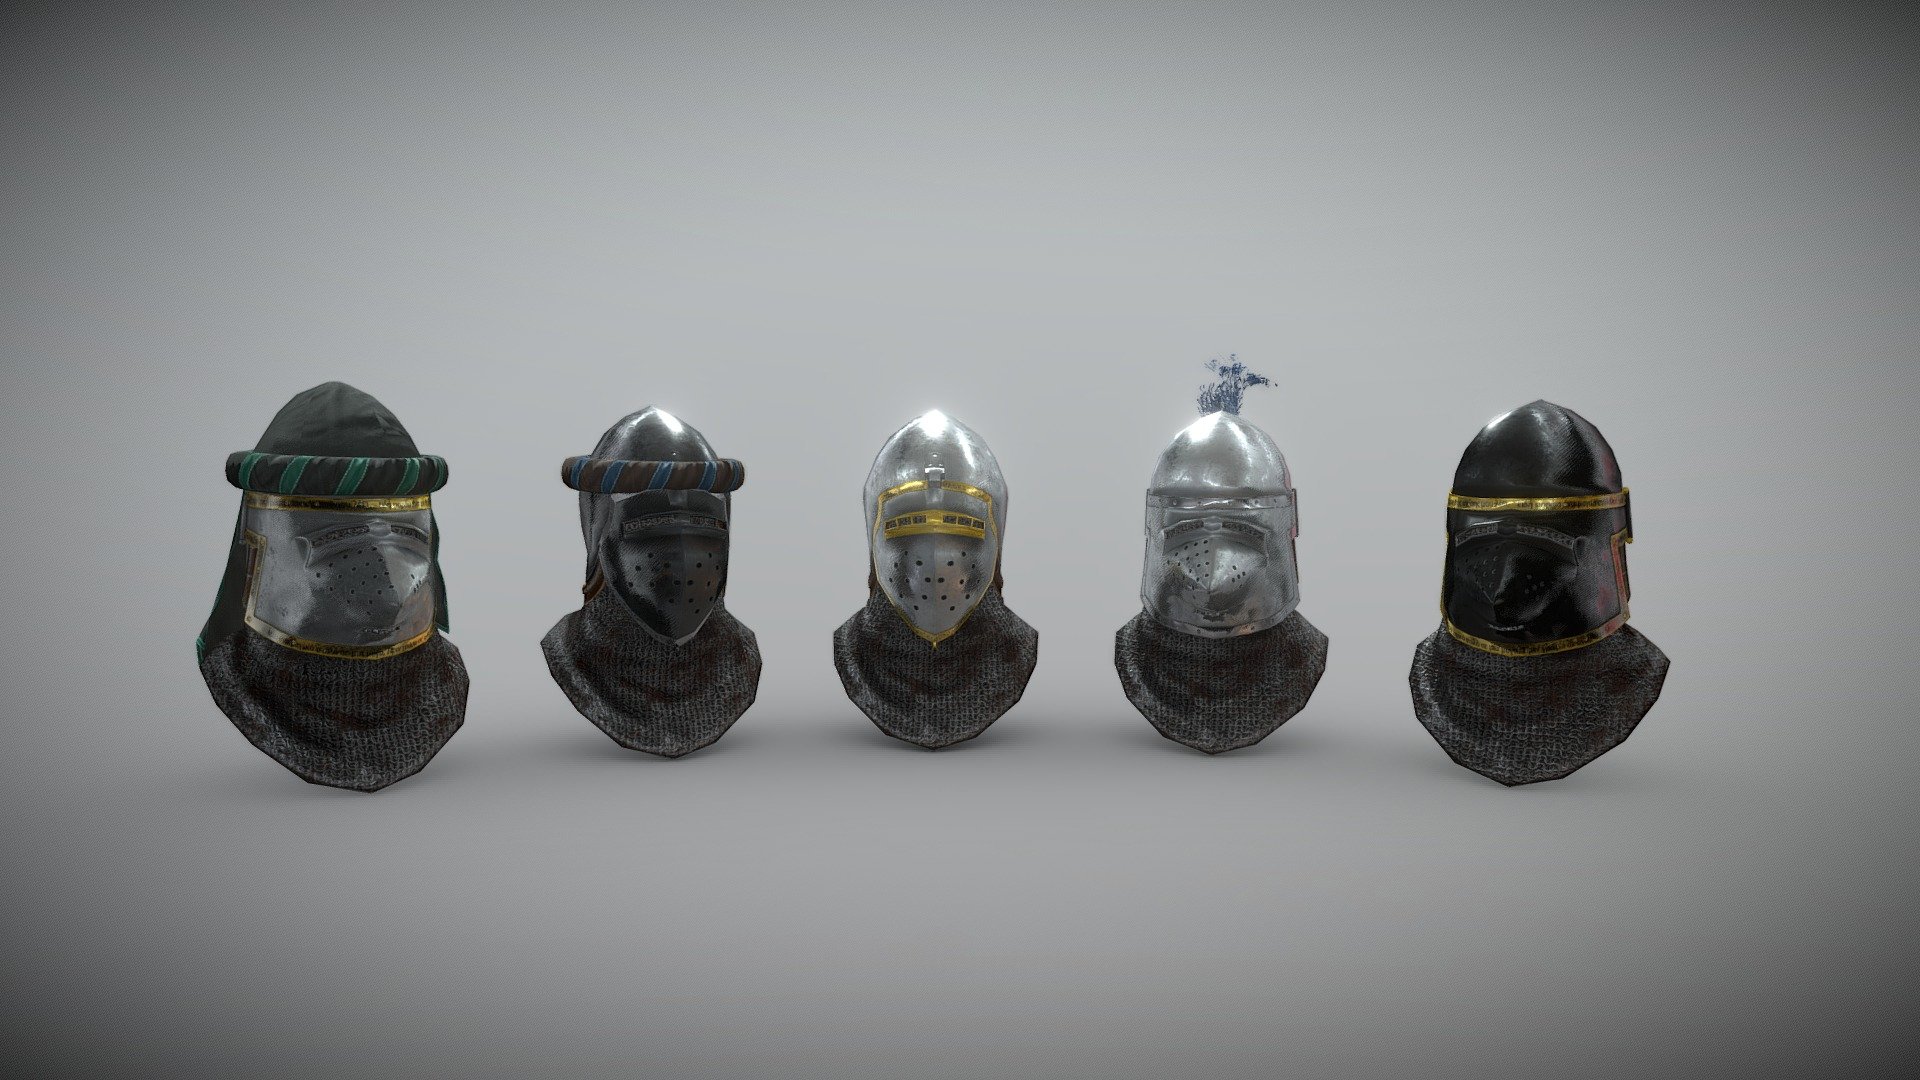 Set of low poly heavy helmets for Gloria Victis game.
More details on my artstation: https://www.artstation.com/artwork/e0qoqX - Heavy helmets skins for Gloria Victis game - 3D model by wojciechmiedziocha 3d model